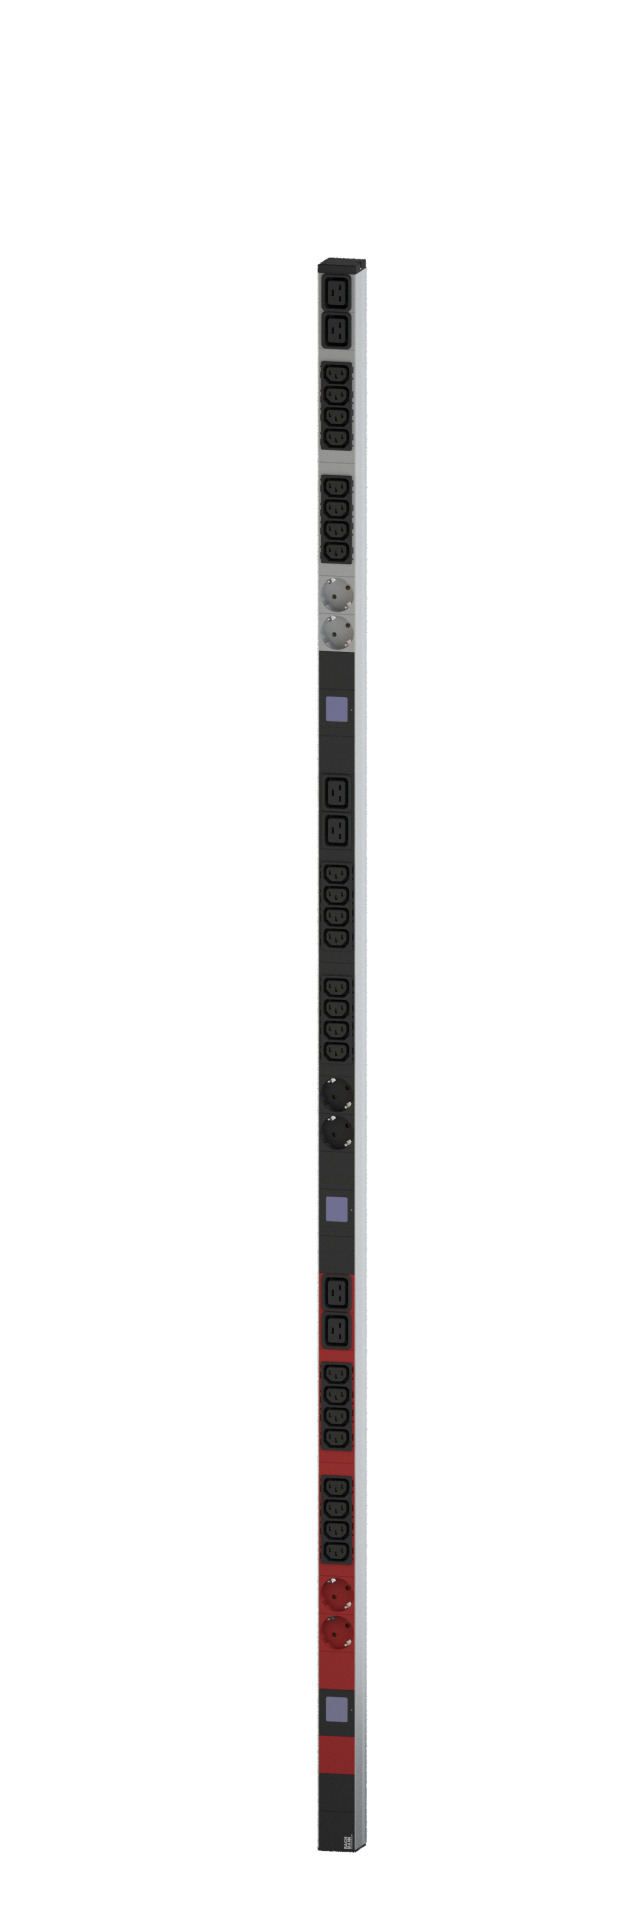 PDU Vertical BN500 24xC13 6xC19 6xCEE7/3 400V 16A with Power Measuring (Display)